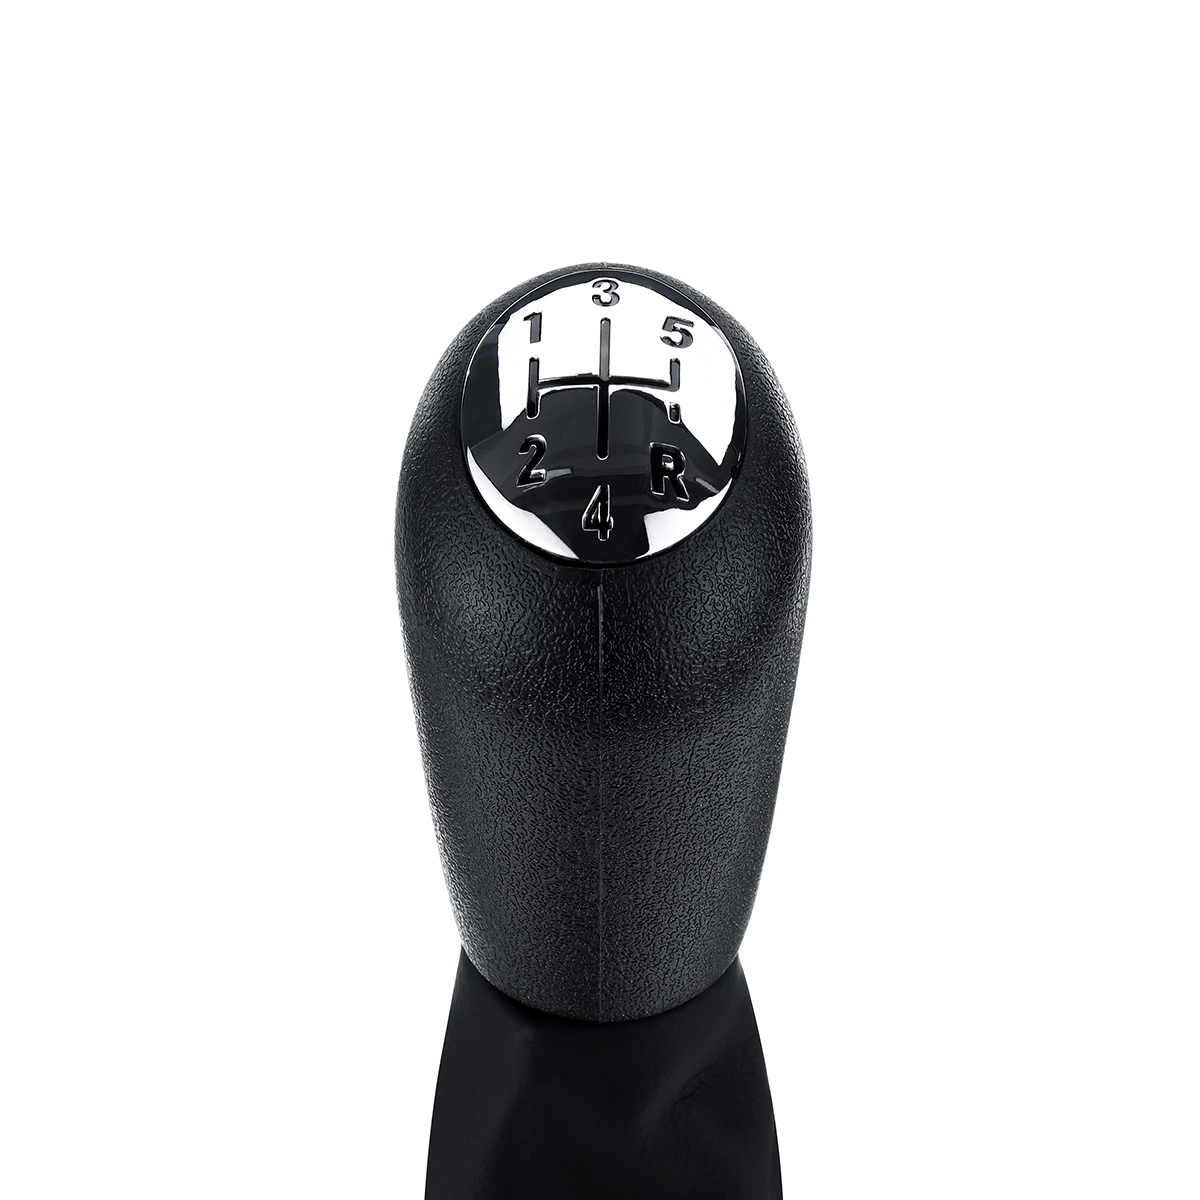 5 Speed Gear Shift Knob with Gaiter Boot Cover Glossy Silver for Renault Megane Clio Kangoo Scenic